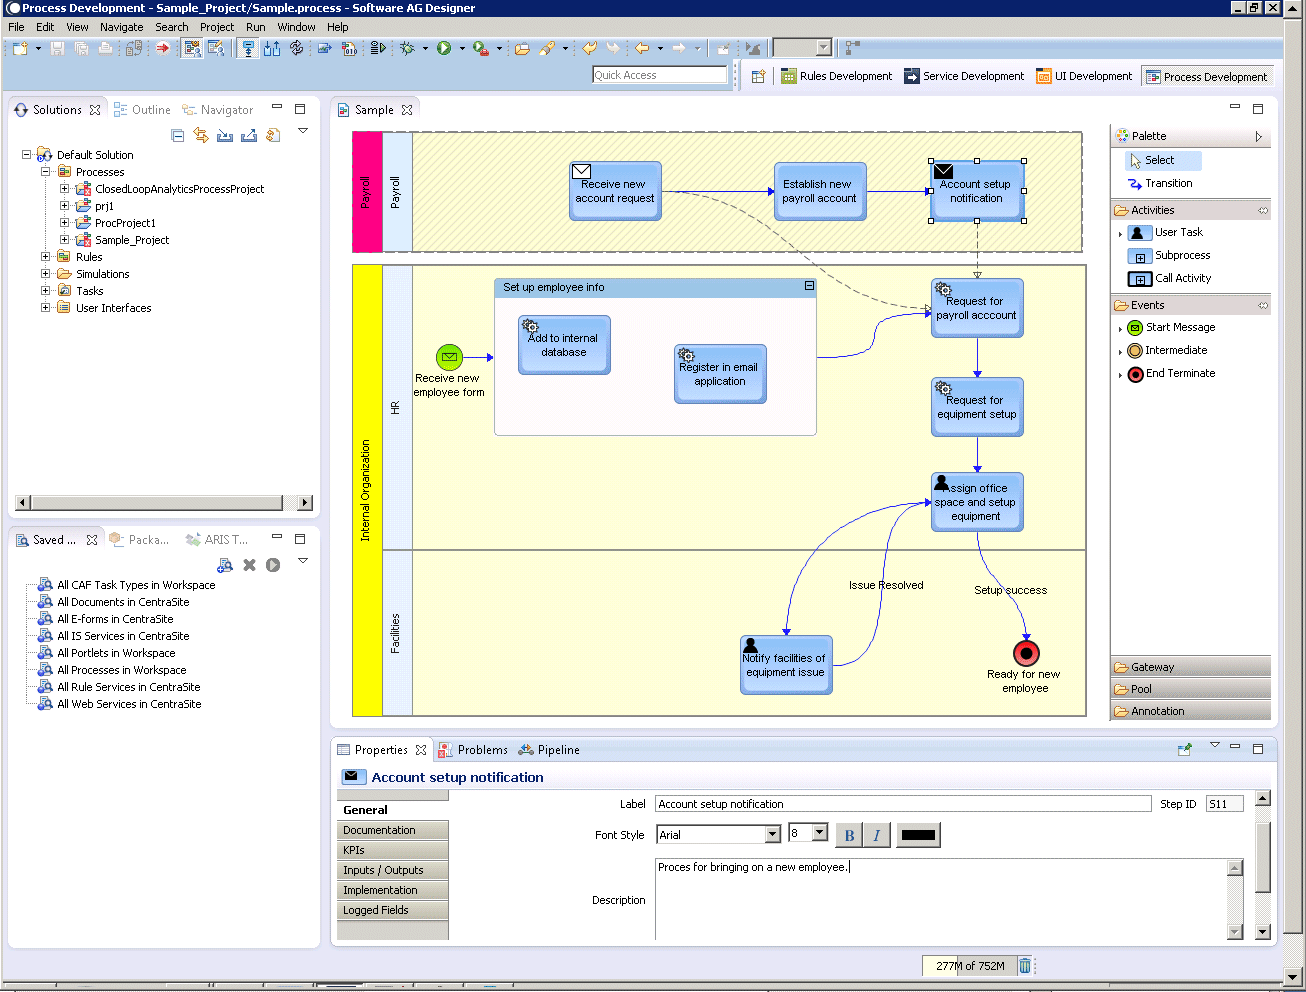 business process model in Business Analyst capability of Software AG Designer